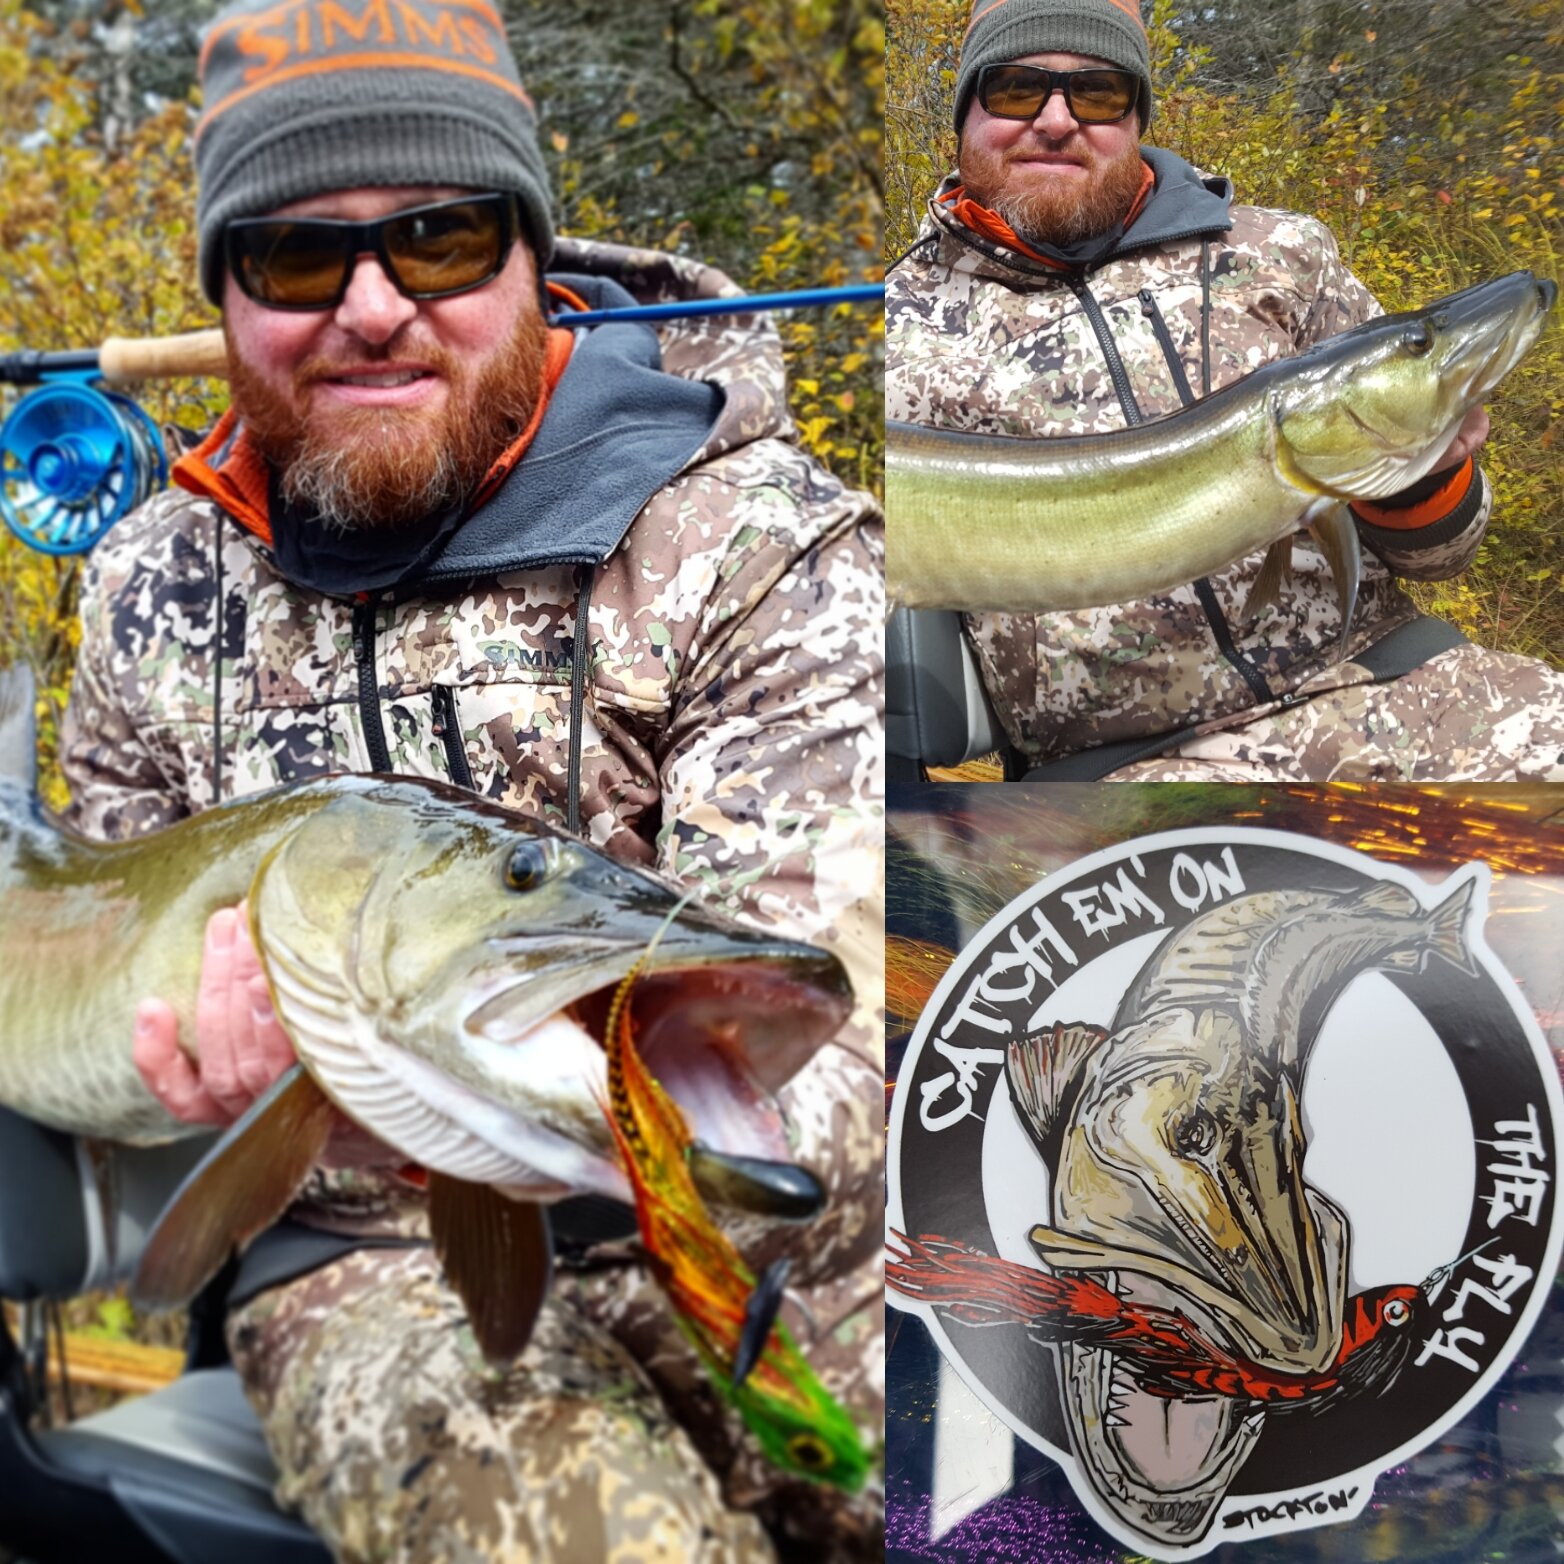  Upper Peninsula Michigan Fishing guide Muskies and Smallmouth.    Check out the awesome decal done by Stockton fly 2 frame.   